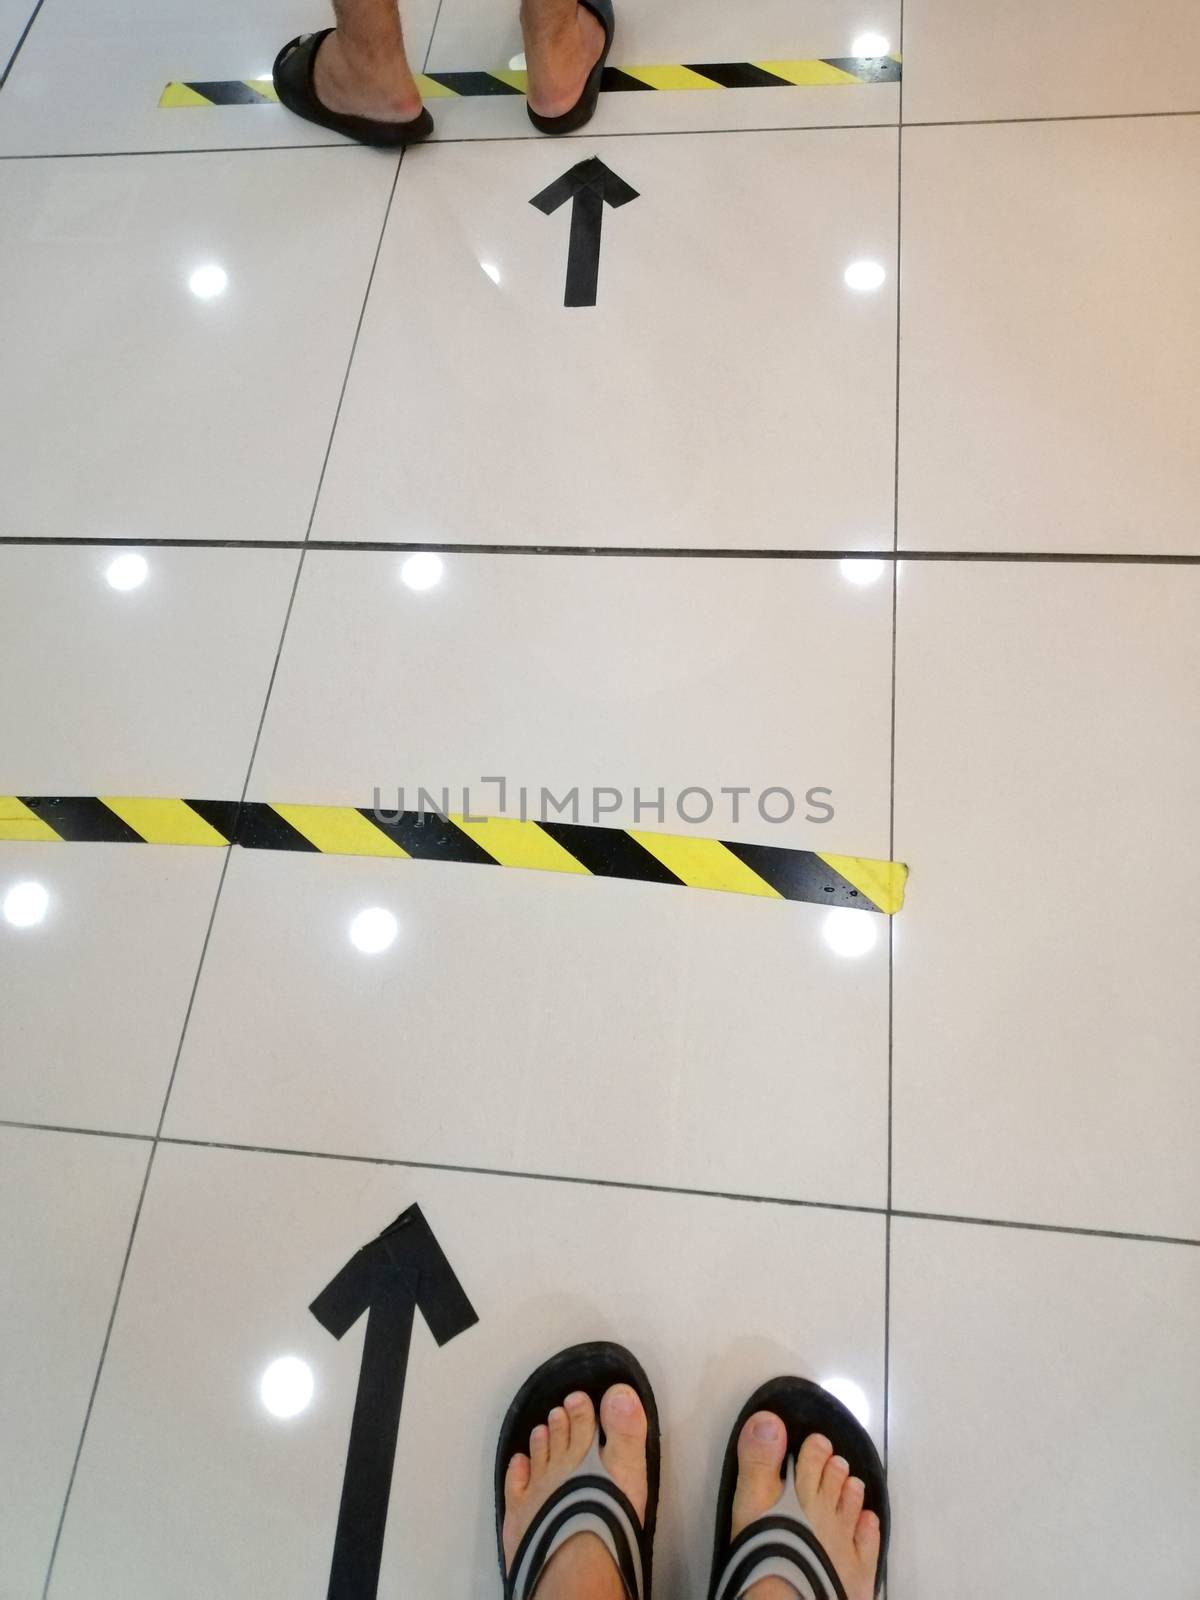 People stand in yellow black footprint  line on the floor of the store to maintain social distance. Concept of the coronavirus pandemic and prevention measures.